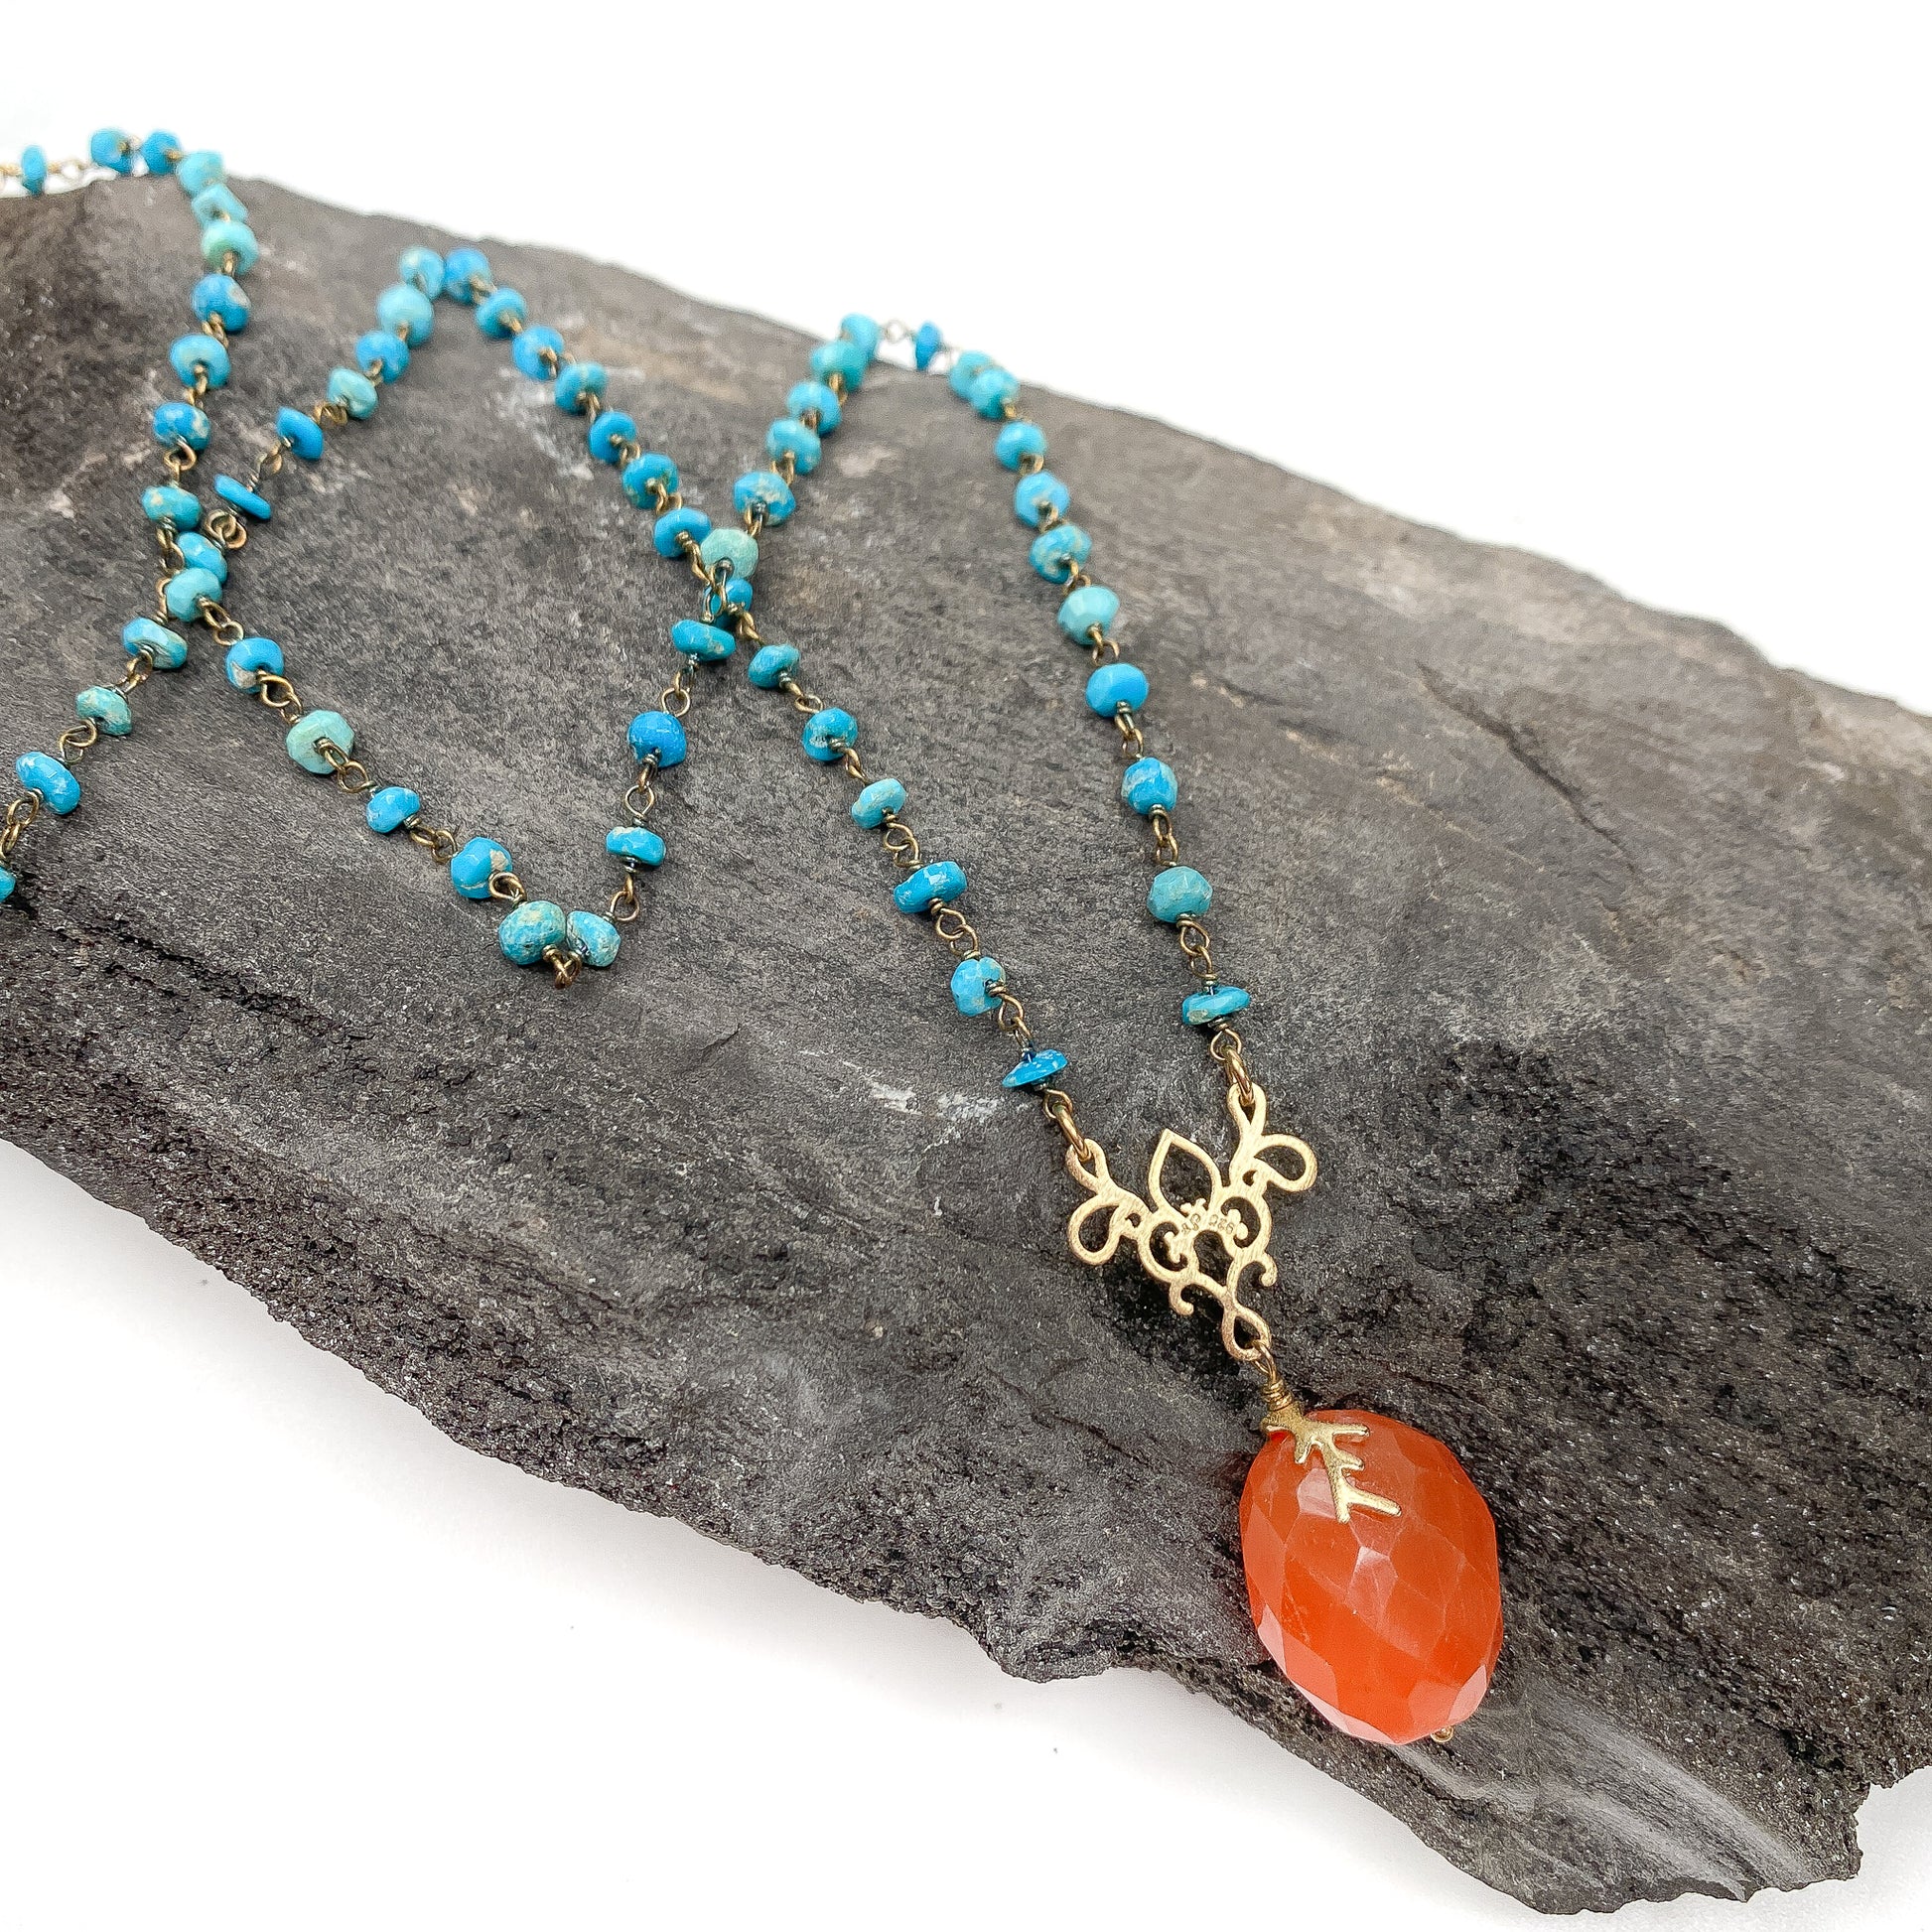 Turquoise and Carnelian Necklace